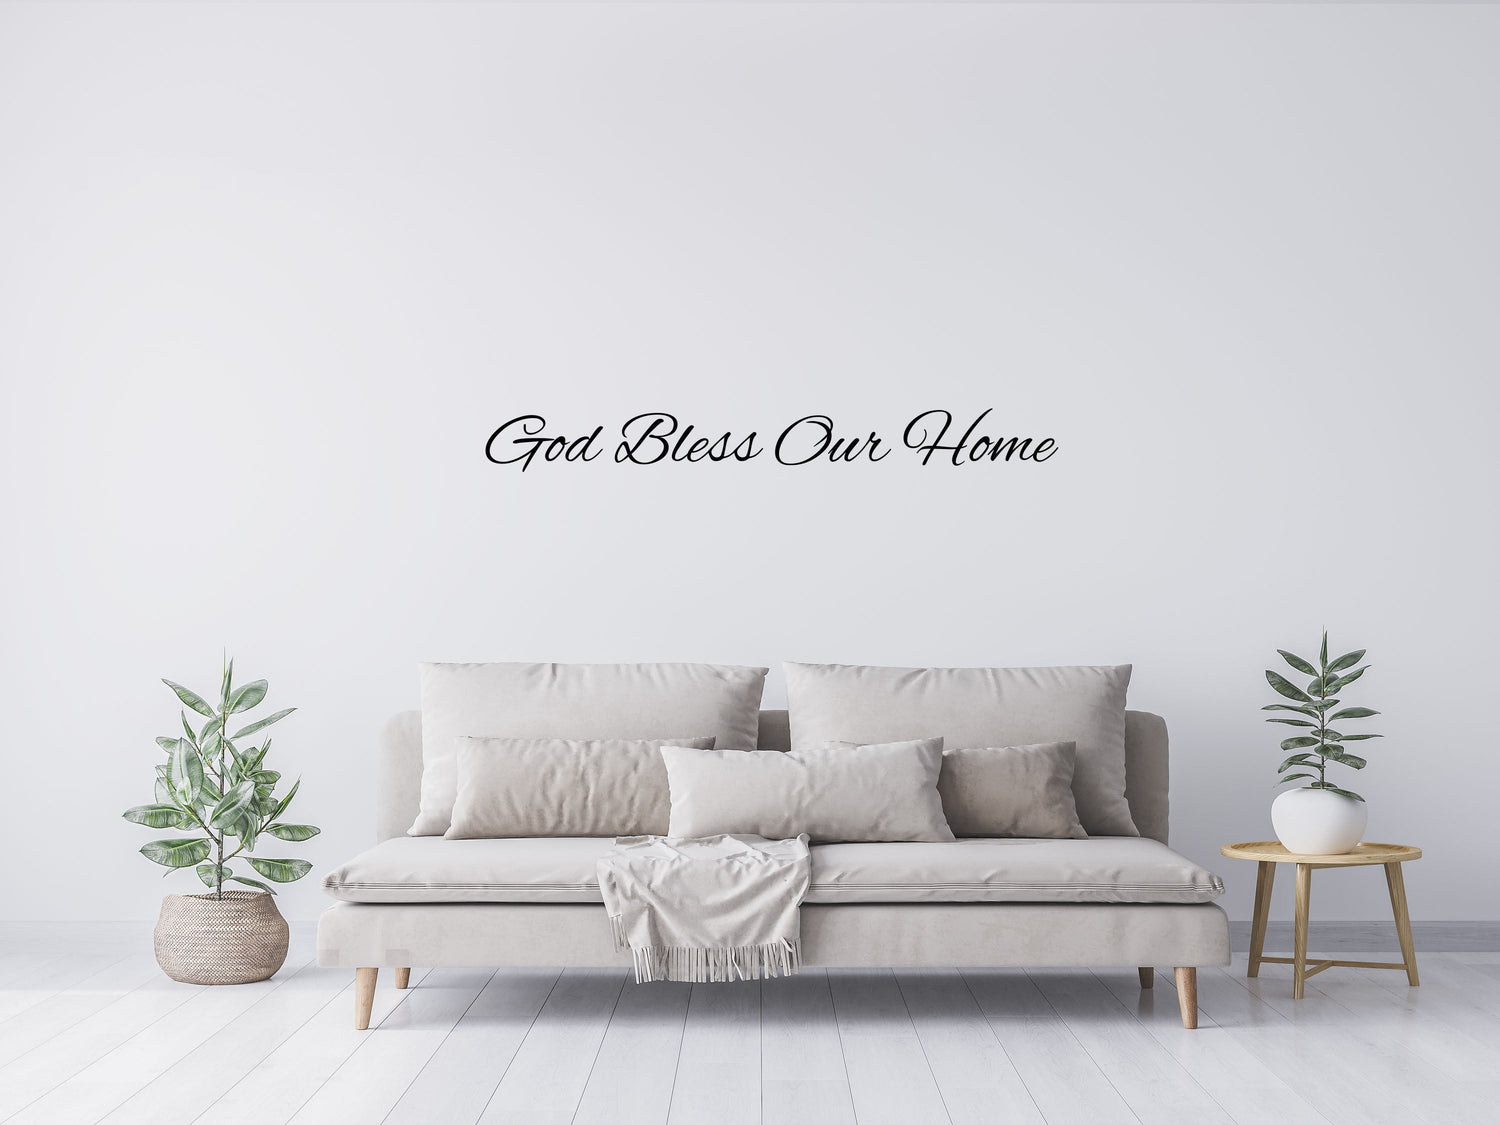 God Bless Our Home - Vinyl Wall Quote - Inspirational Wall Decals Vinyl Wall Decal Inspirational Wall Signs 